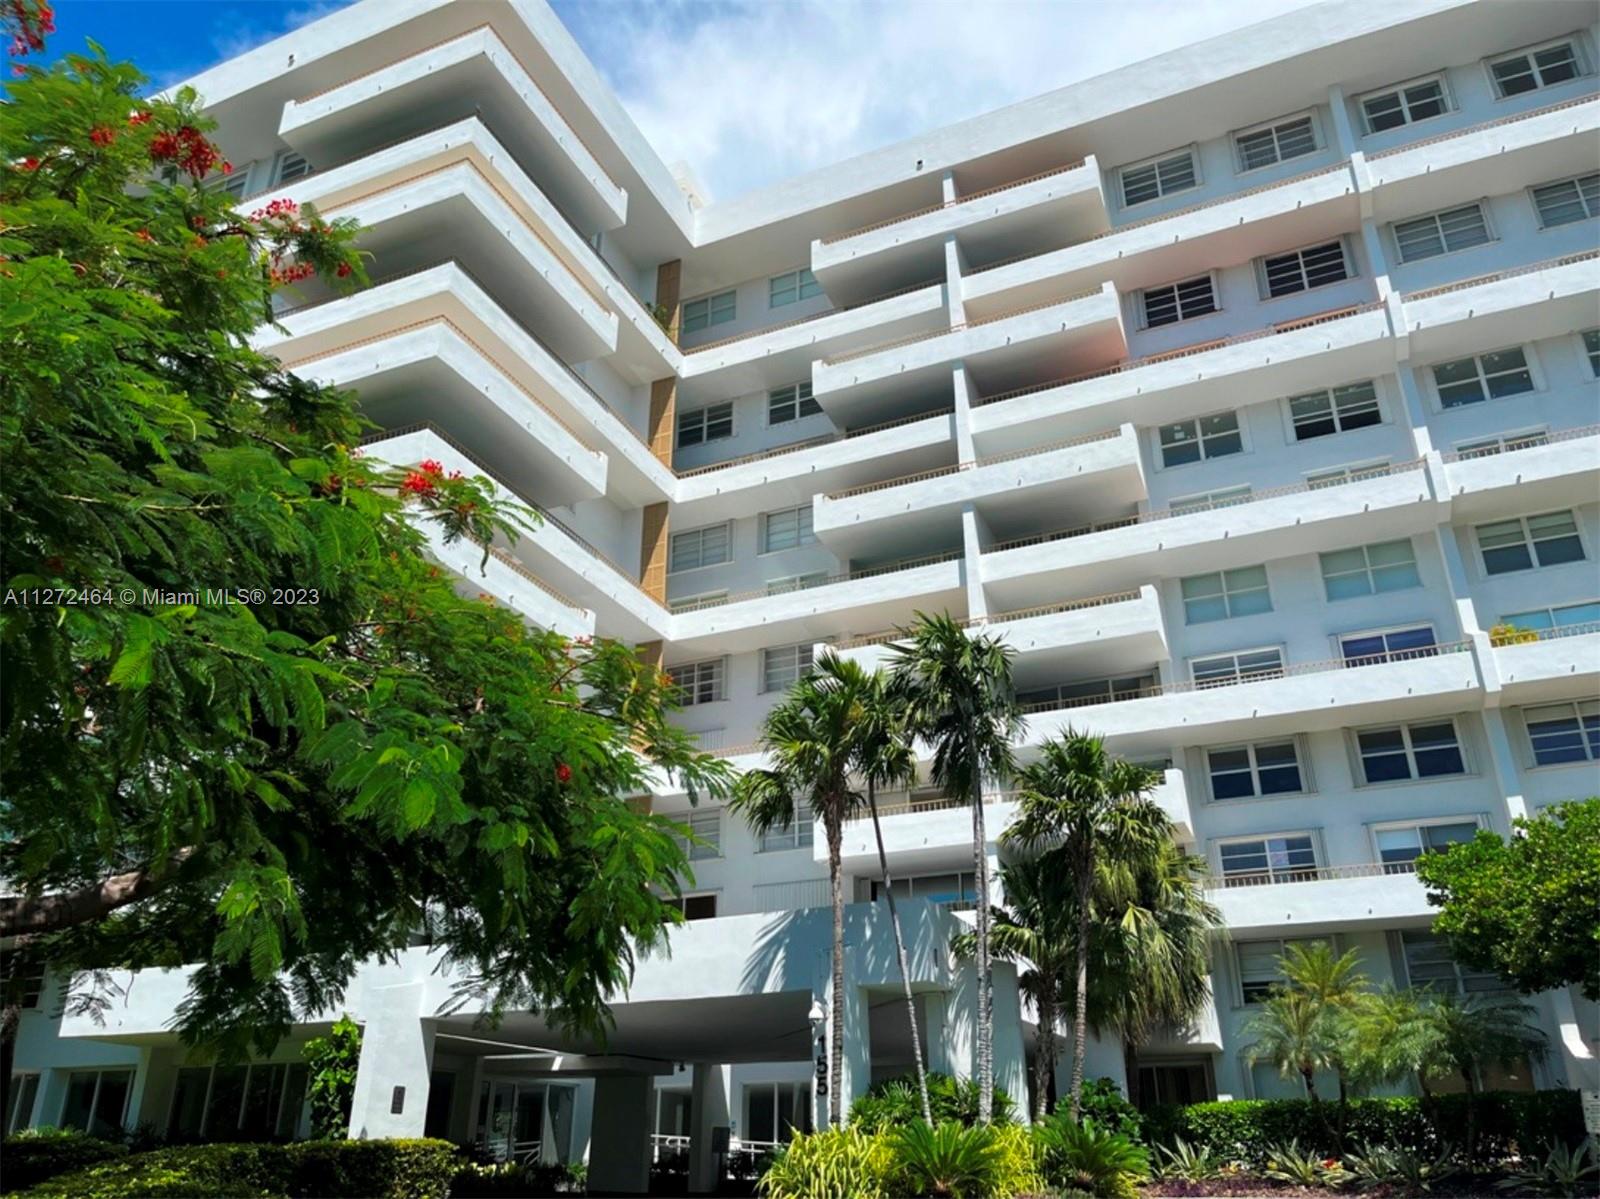 Beautiful apartment located in beachfront complex.  Tiled floors. Amenities include pool, gym, party room and comes with assigned covered parking space.  Storage space on same floor.  Complex gated and secure lobby.  Walking distance to shops, restaurant, churches and parks.